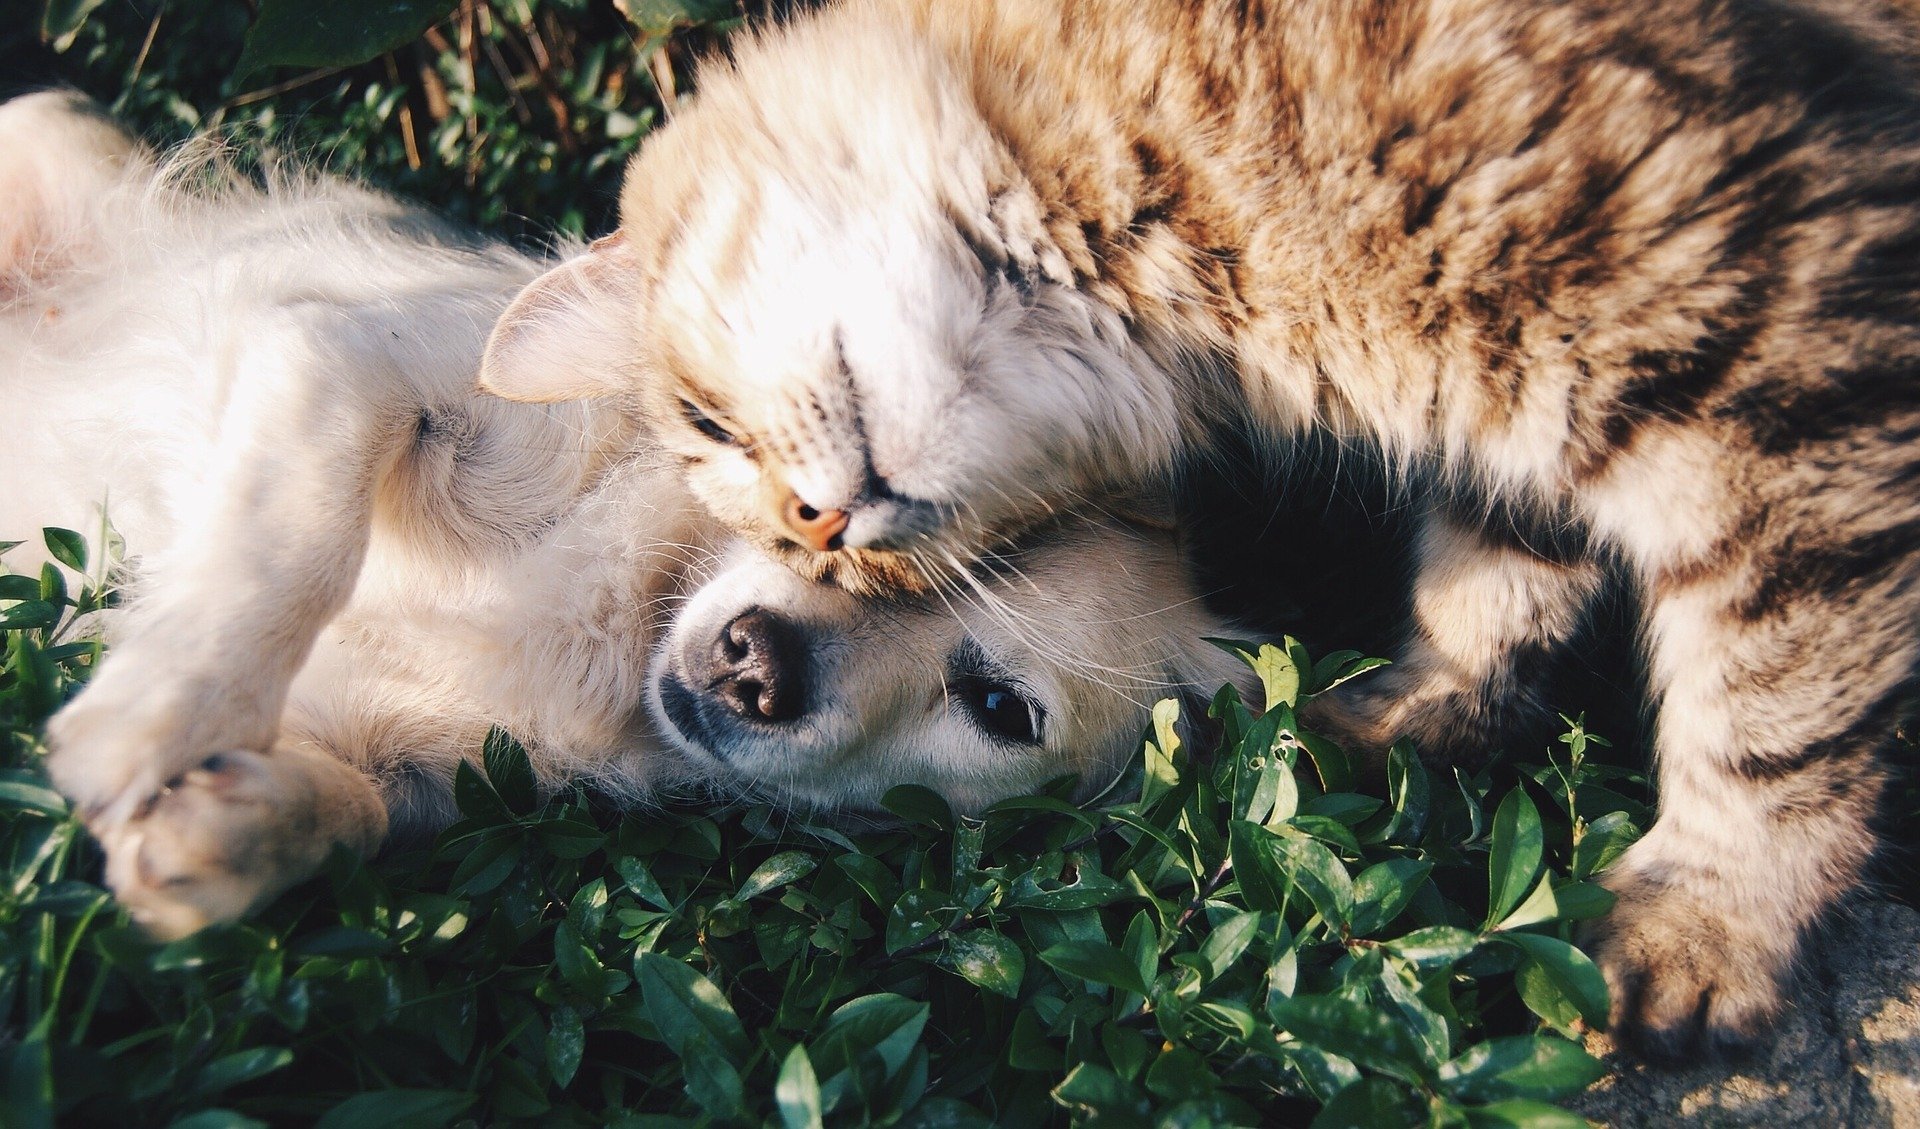 Dog and cat playing with each other